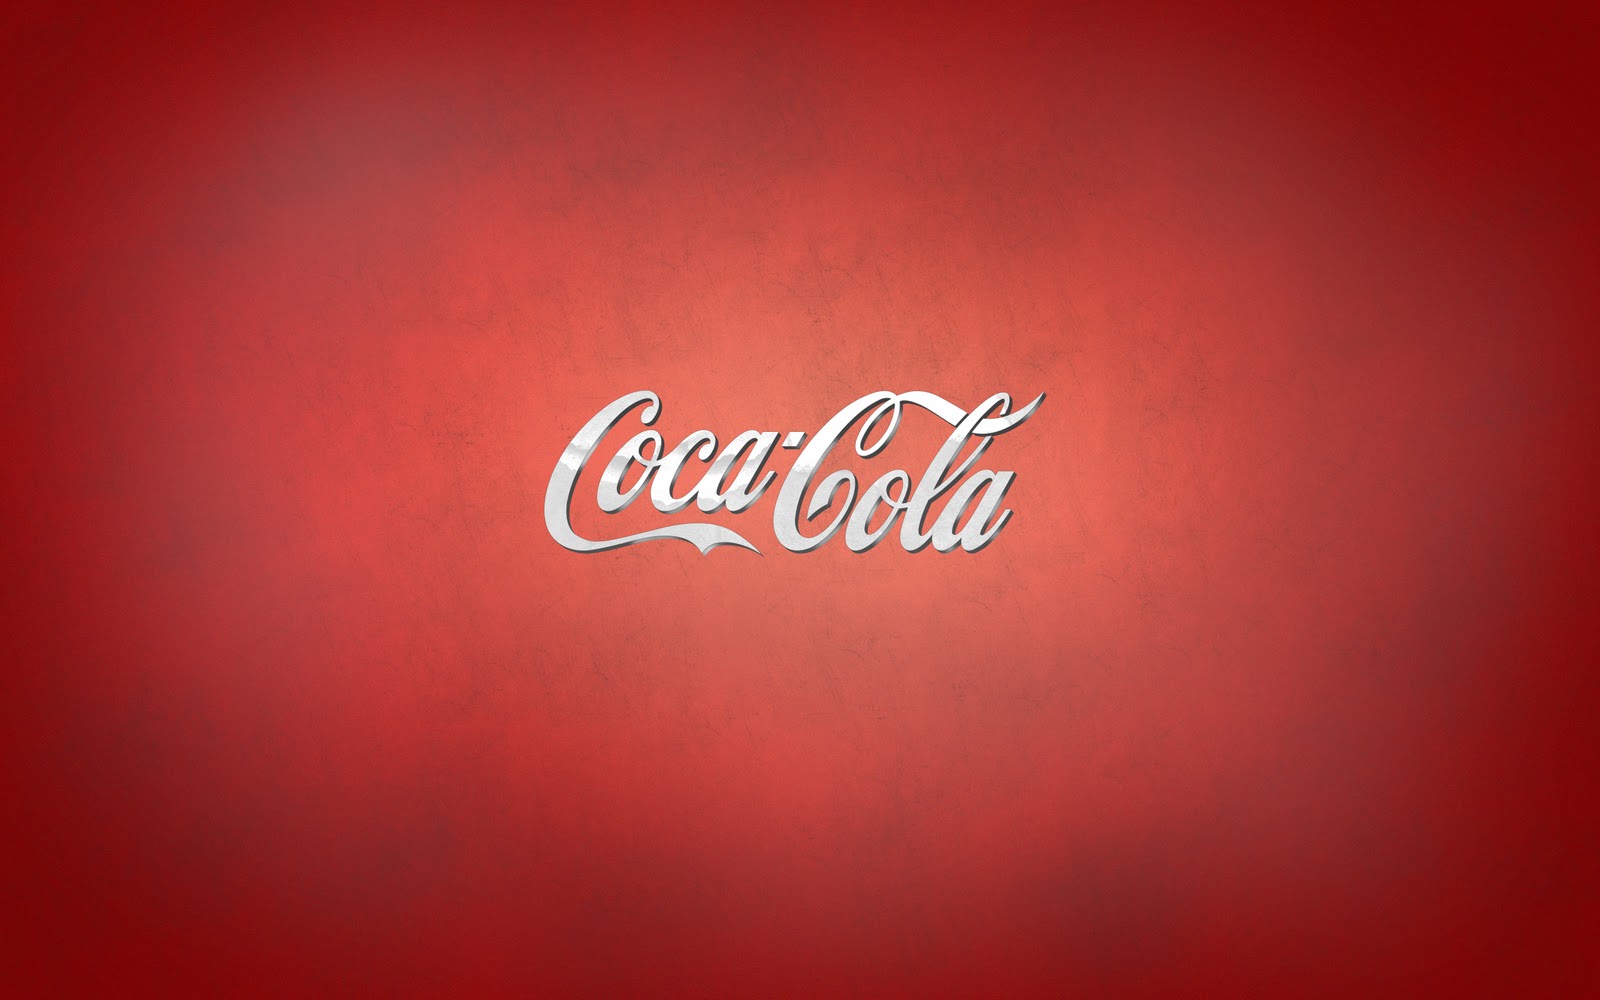  Red Background Coca Cola HD Wallpapers CocaCola Desktop backgrounds